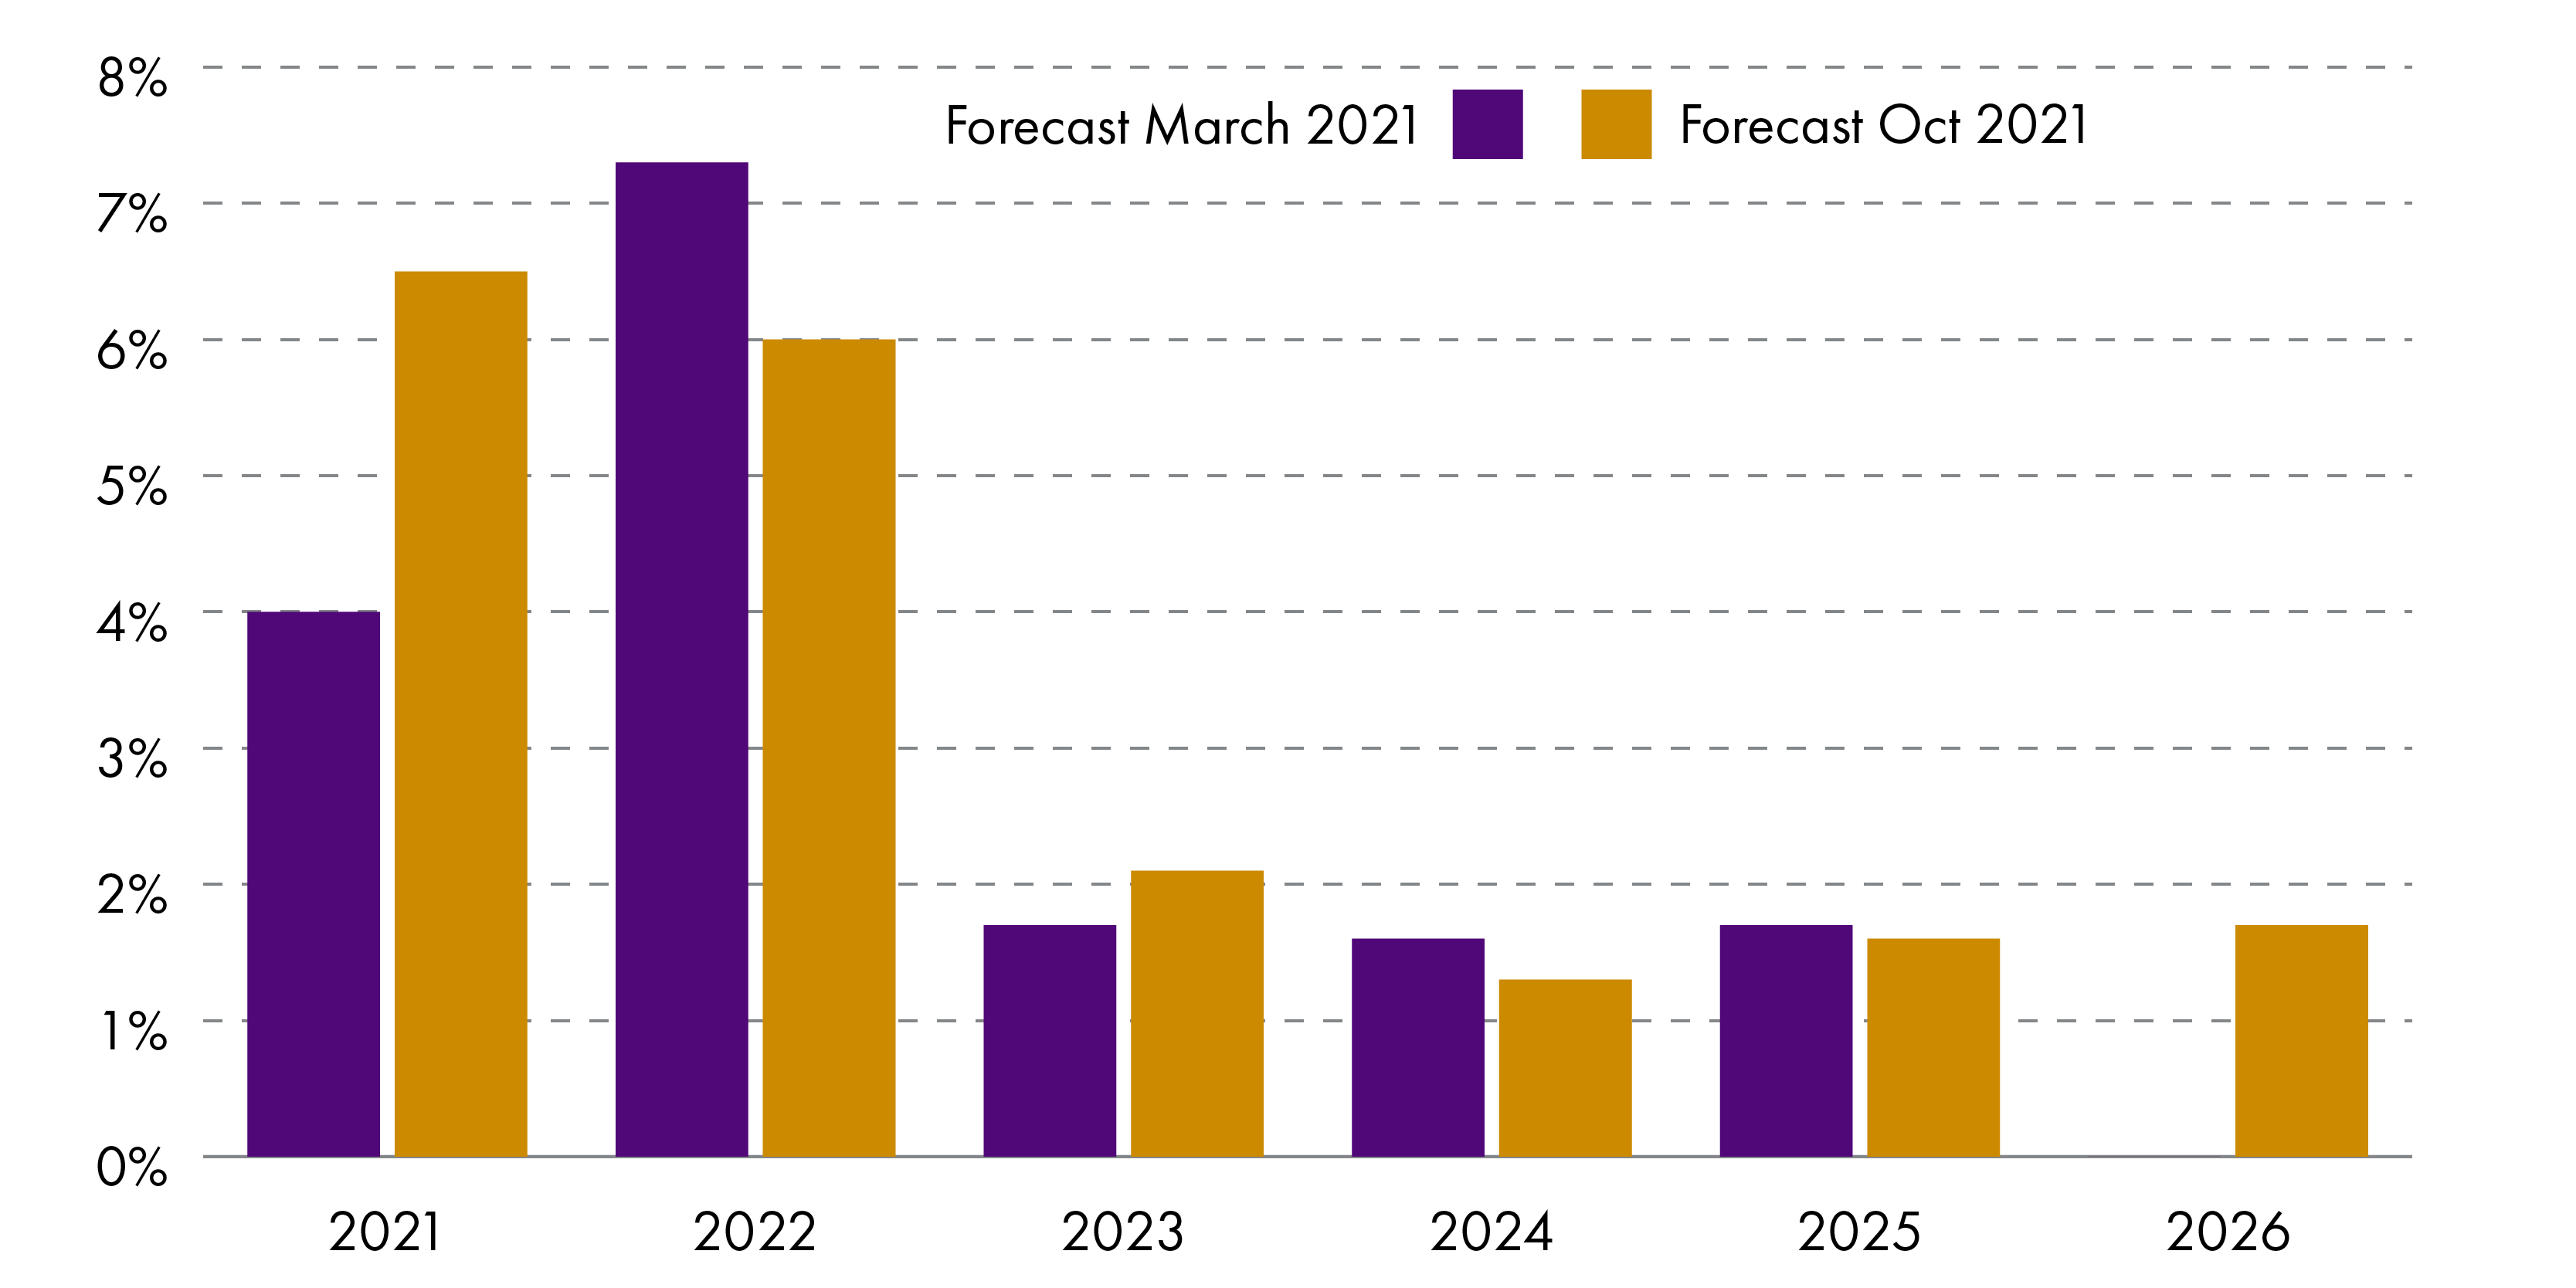 Figure 1 shows how the OBR forecasts in October 2021 for GDP growth for2022, 2024 and 2025 are anticipated to be lower than the OBR forecast in March 2021 but higher than previously forecasts for 2023.